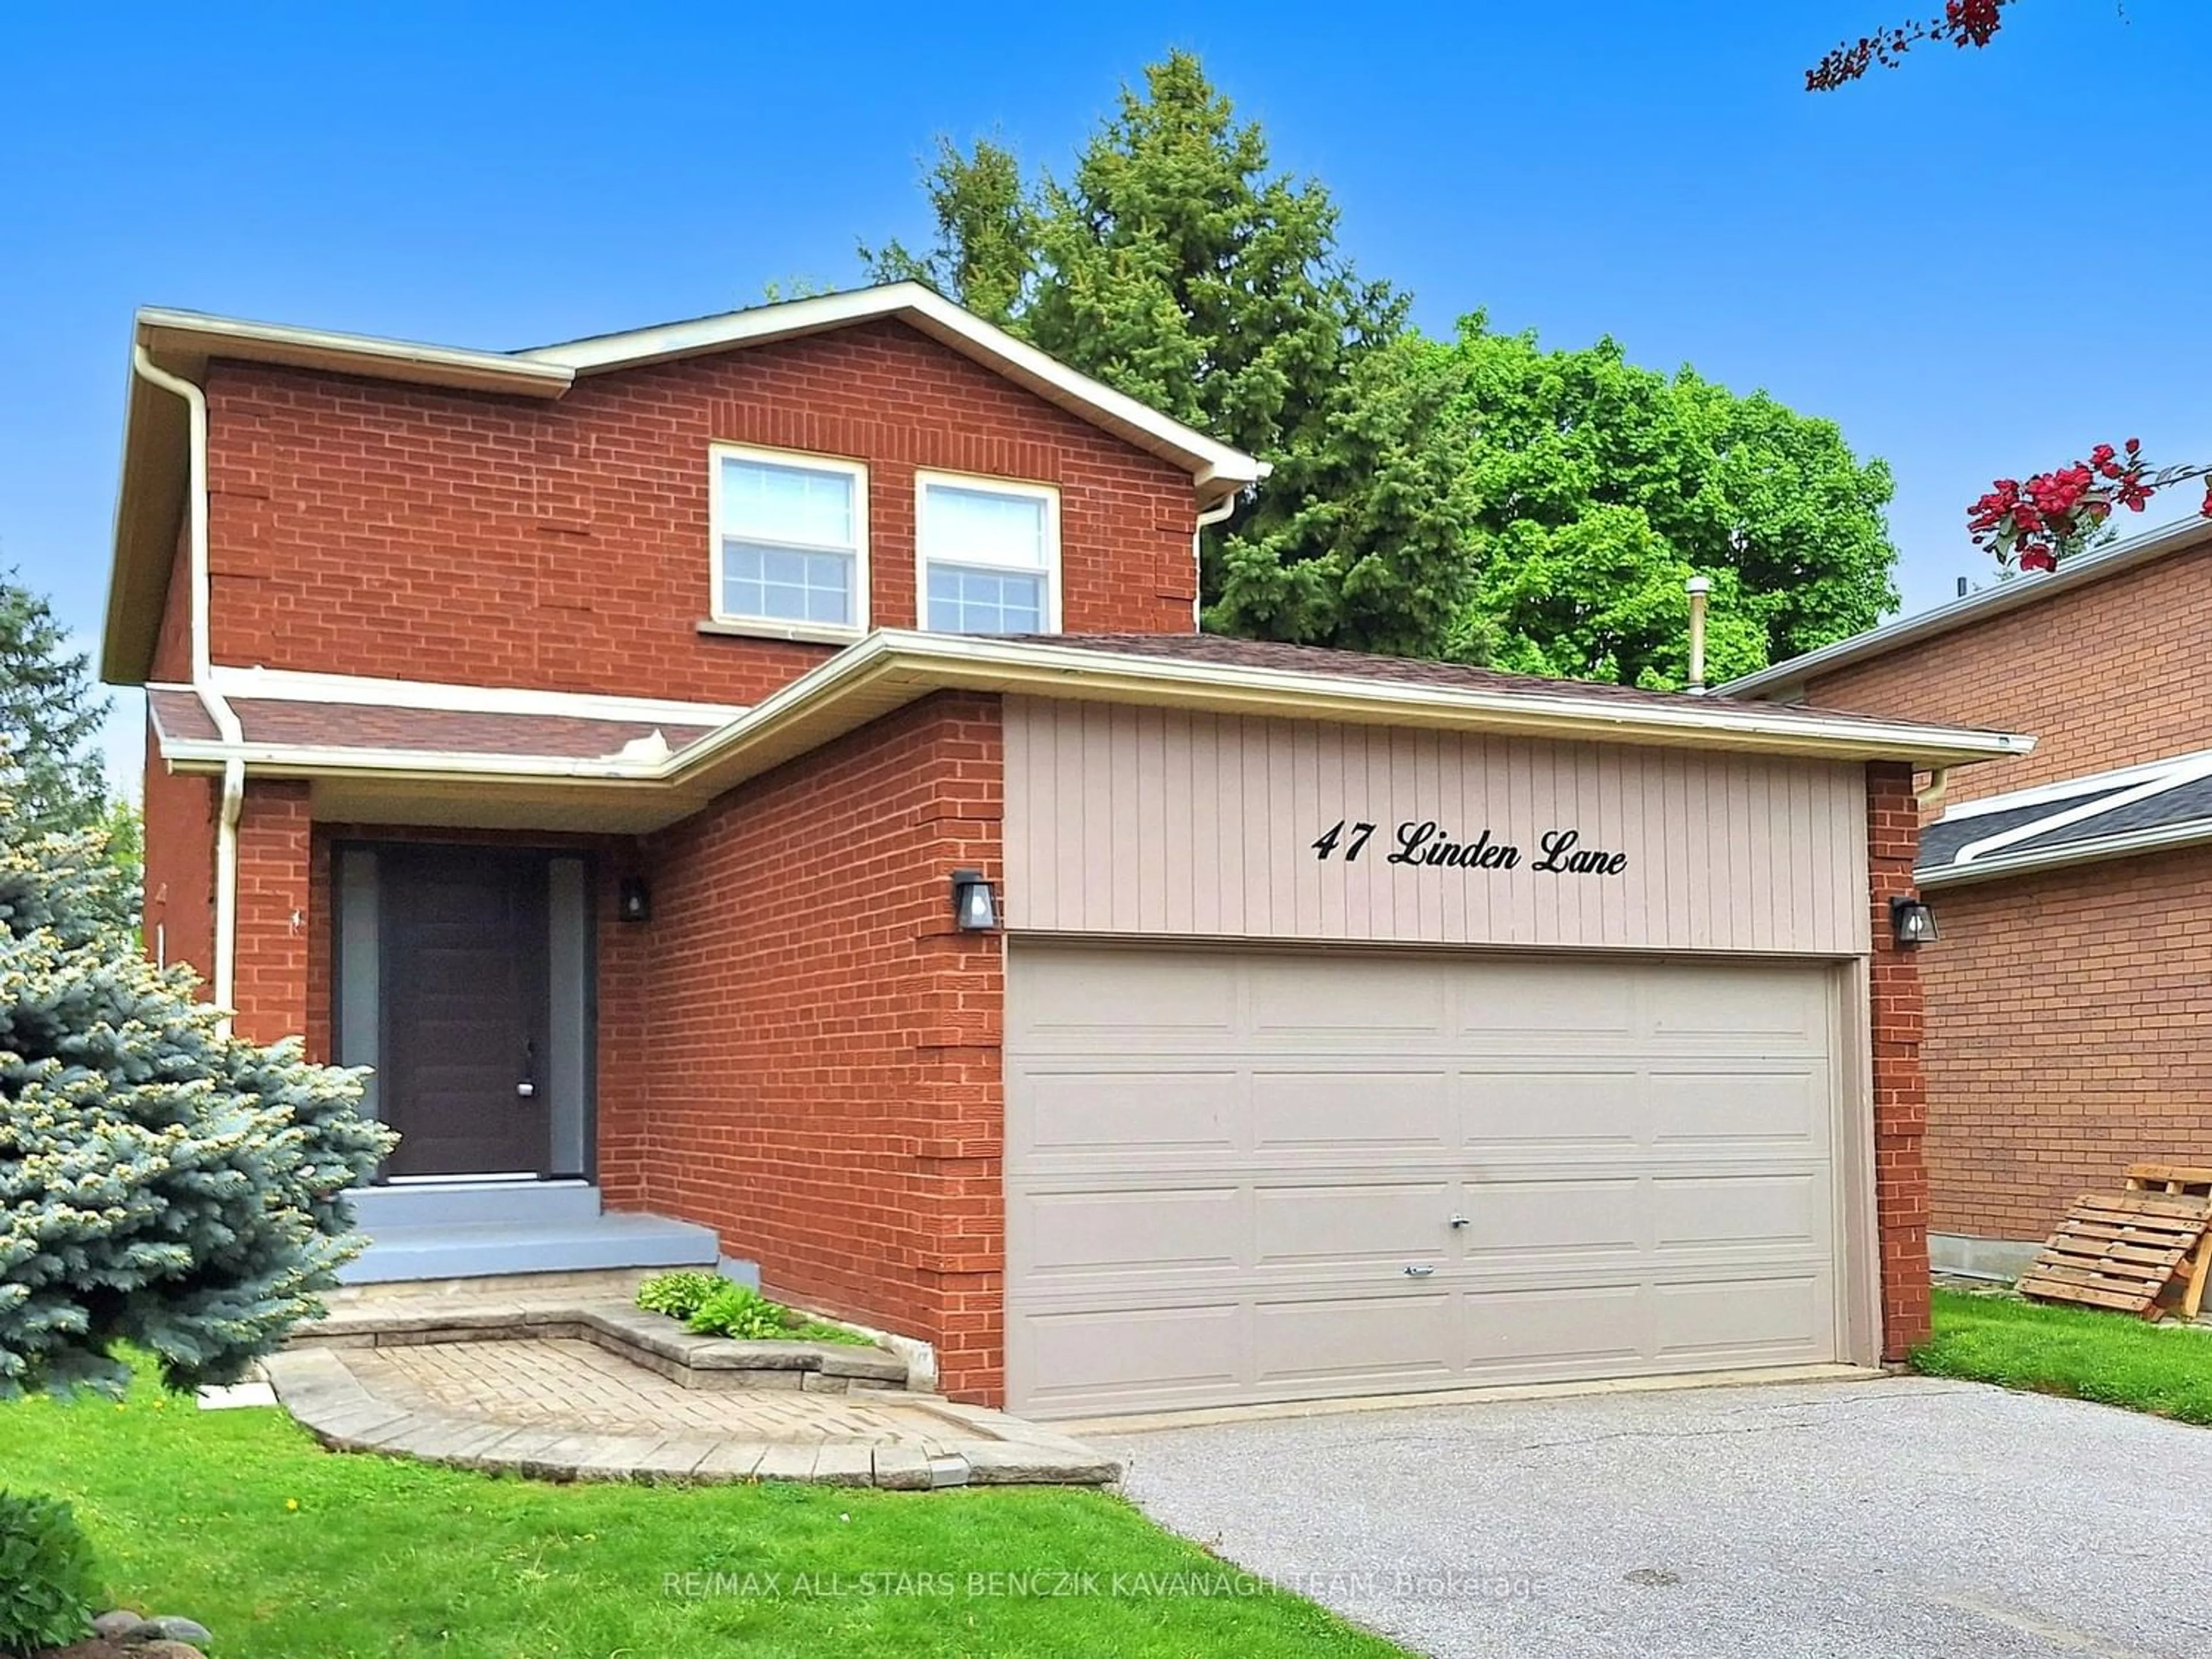 Home with brick exterior material for 47 Linden Lane, Whitchurch-Stouffville Ontario L4A 5S2